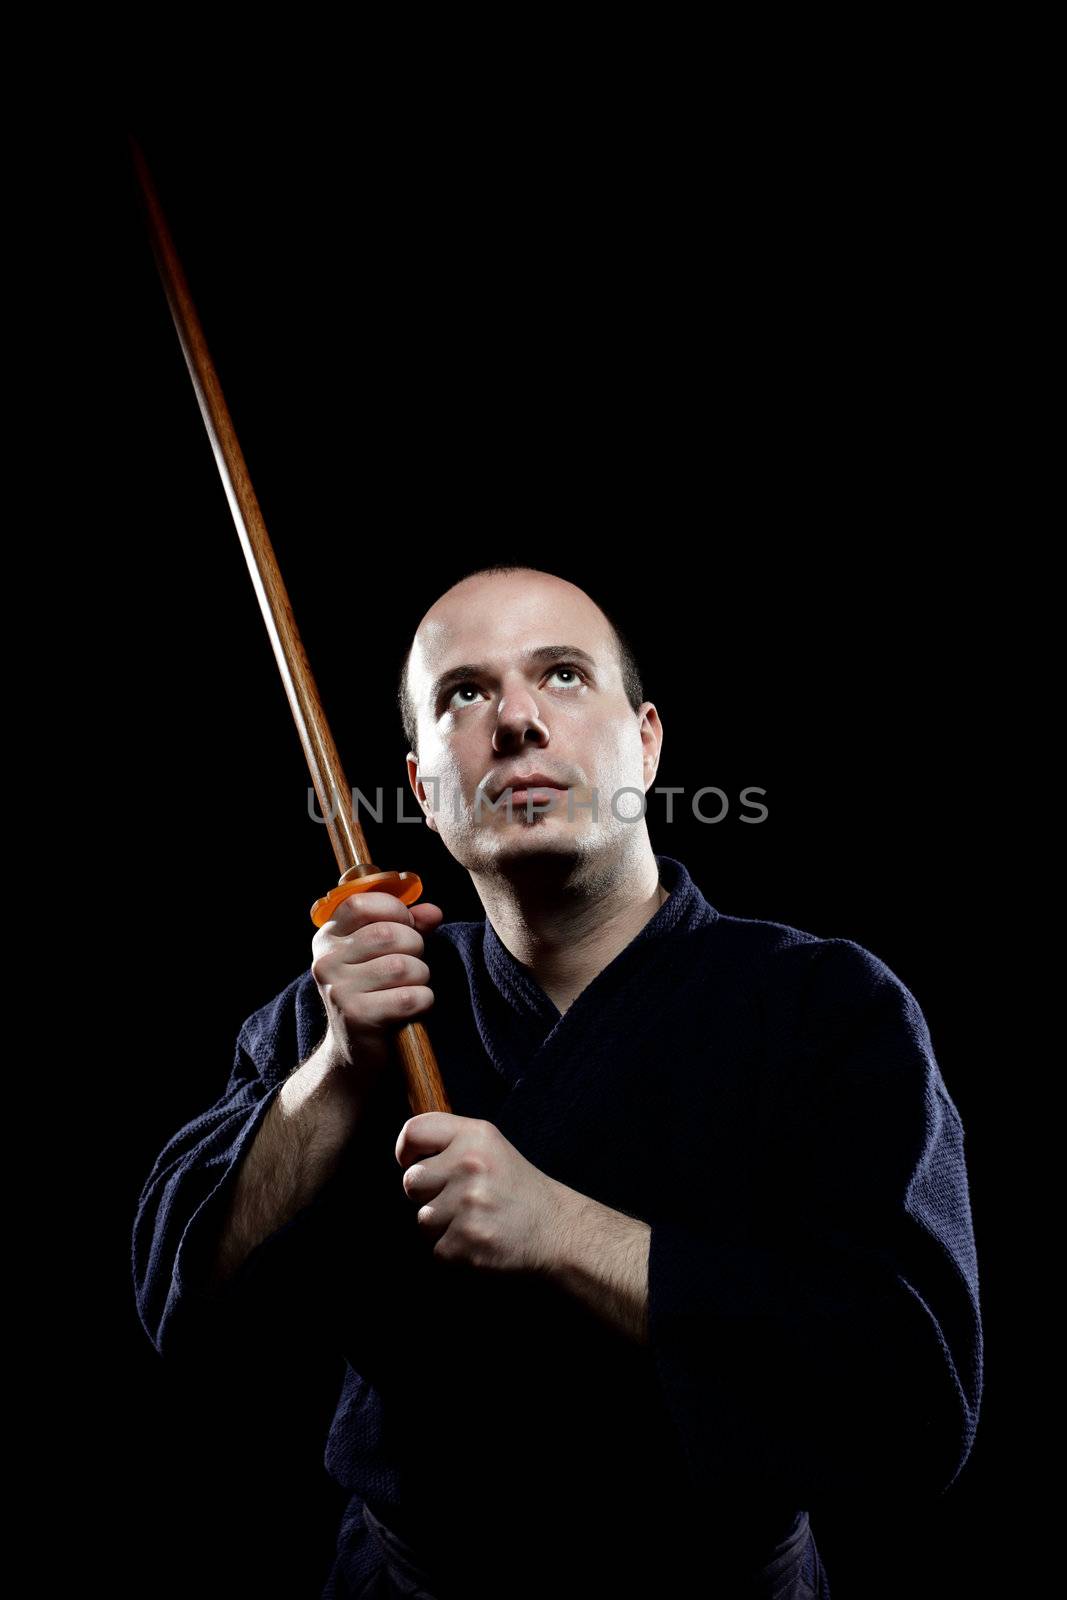 portrait of a kendo fighter with bokken, against black backgroung